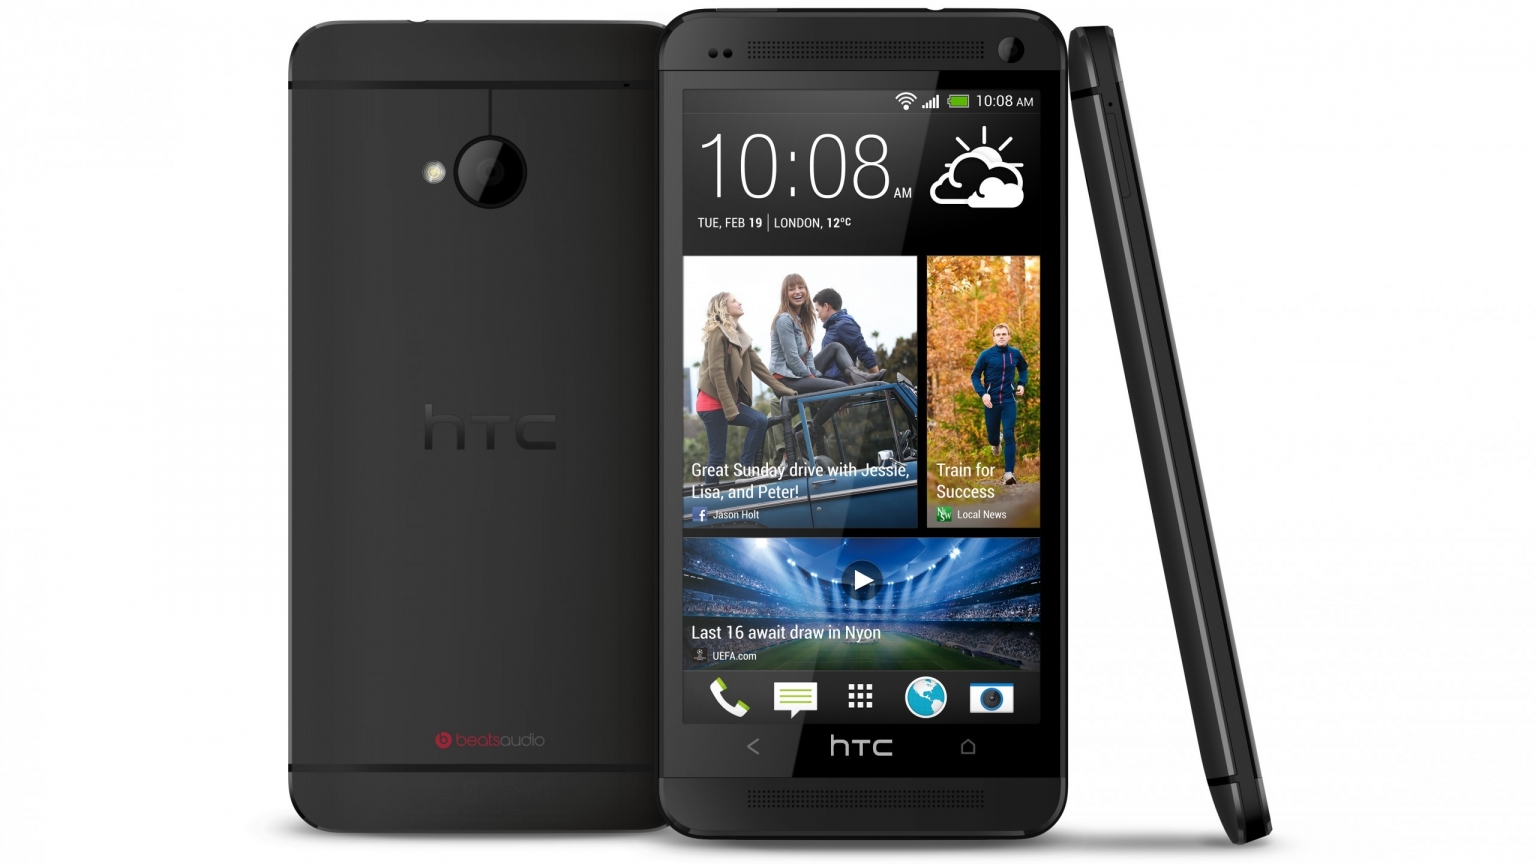 New HTC One for 1536 x 864 HDTV resolution